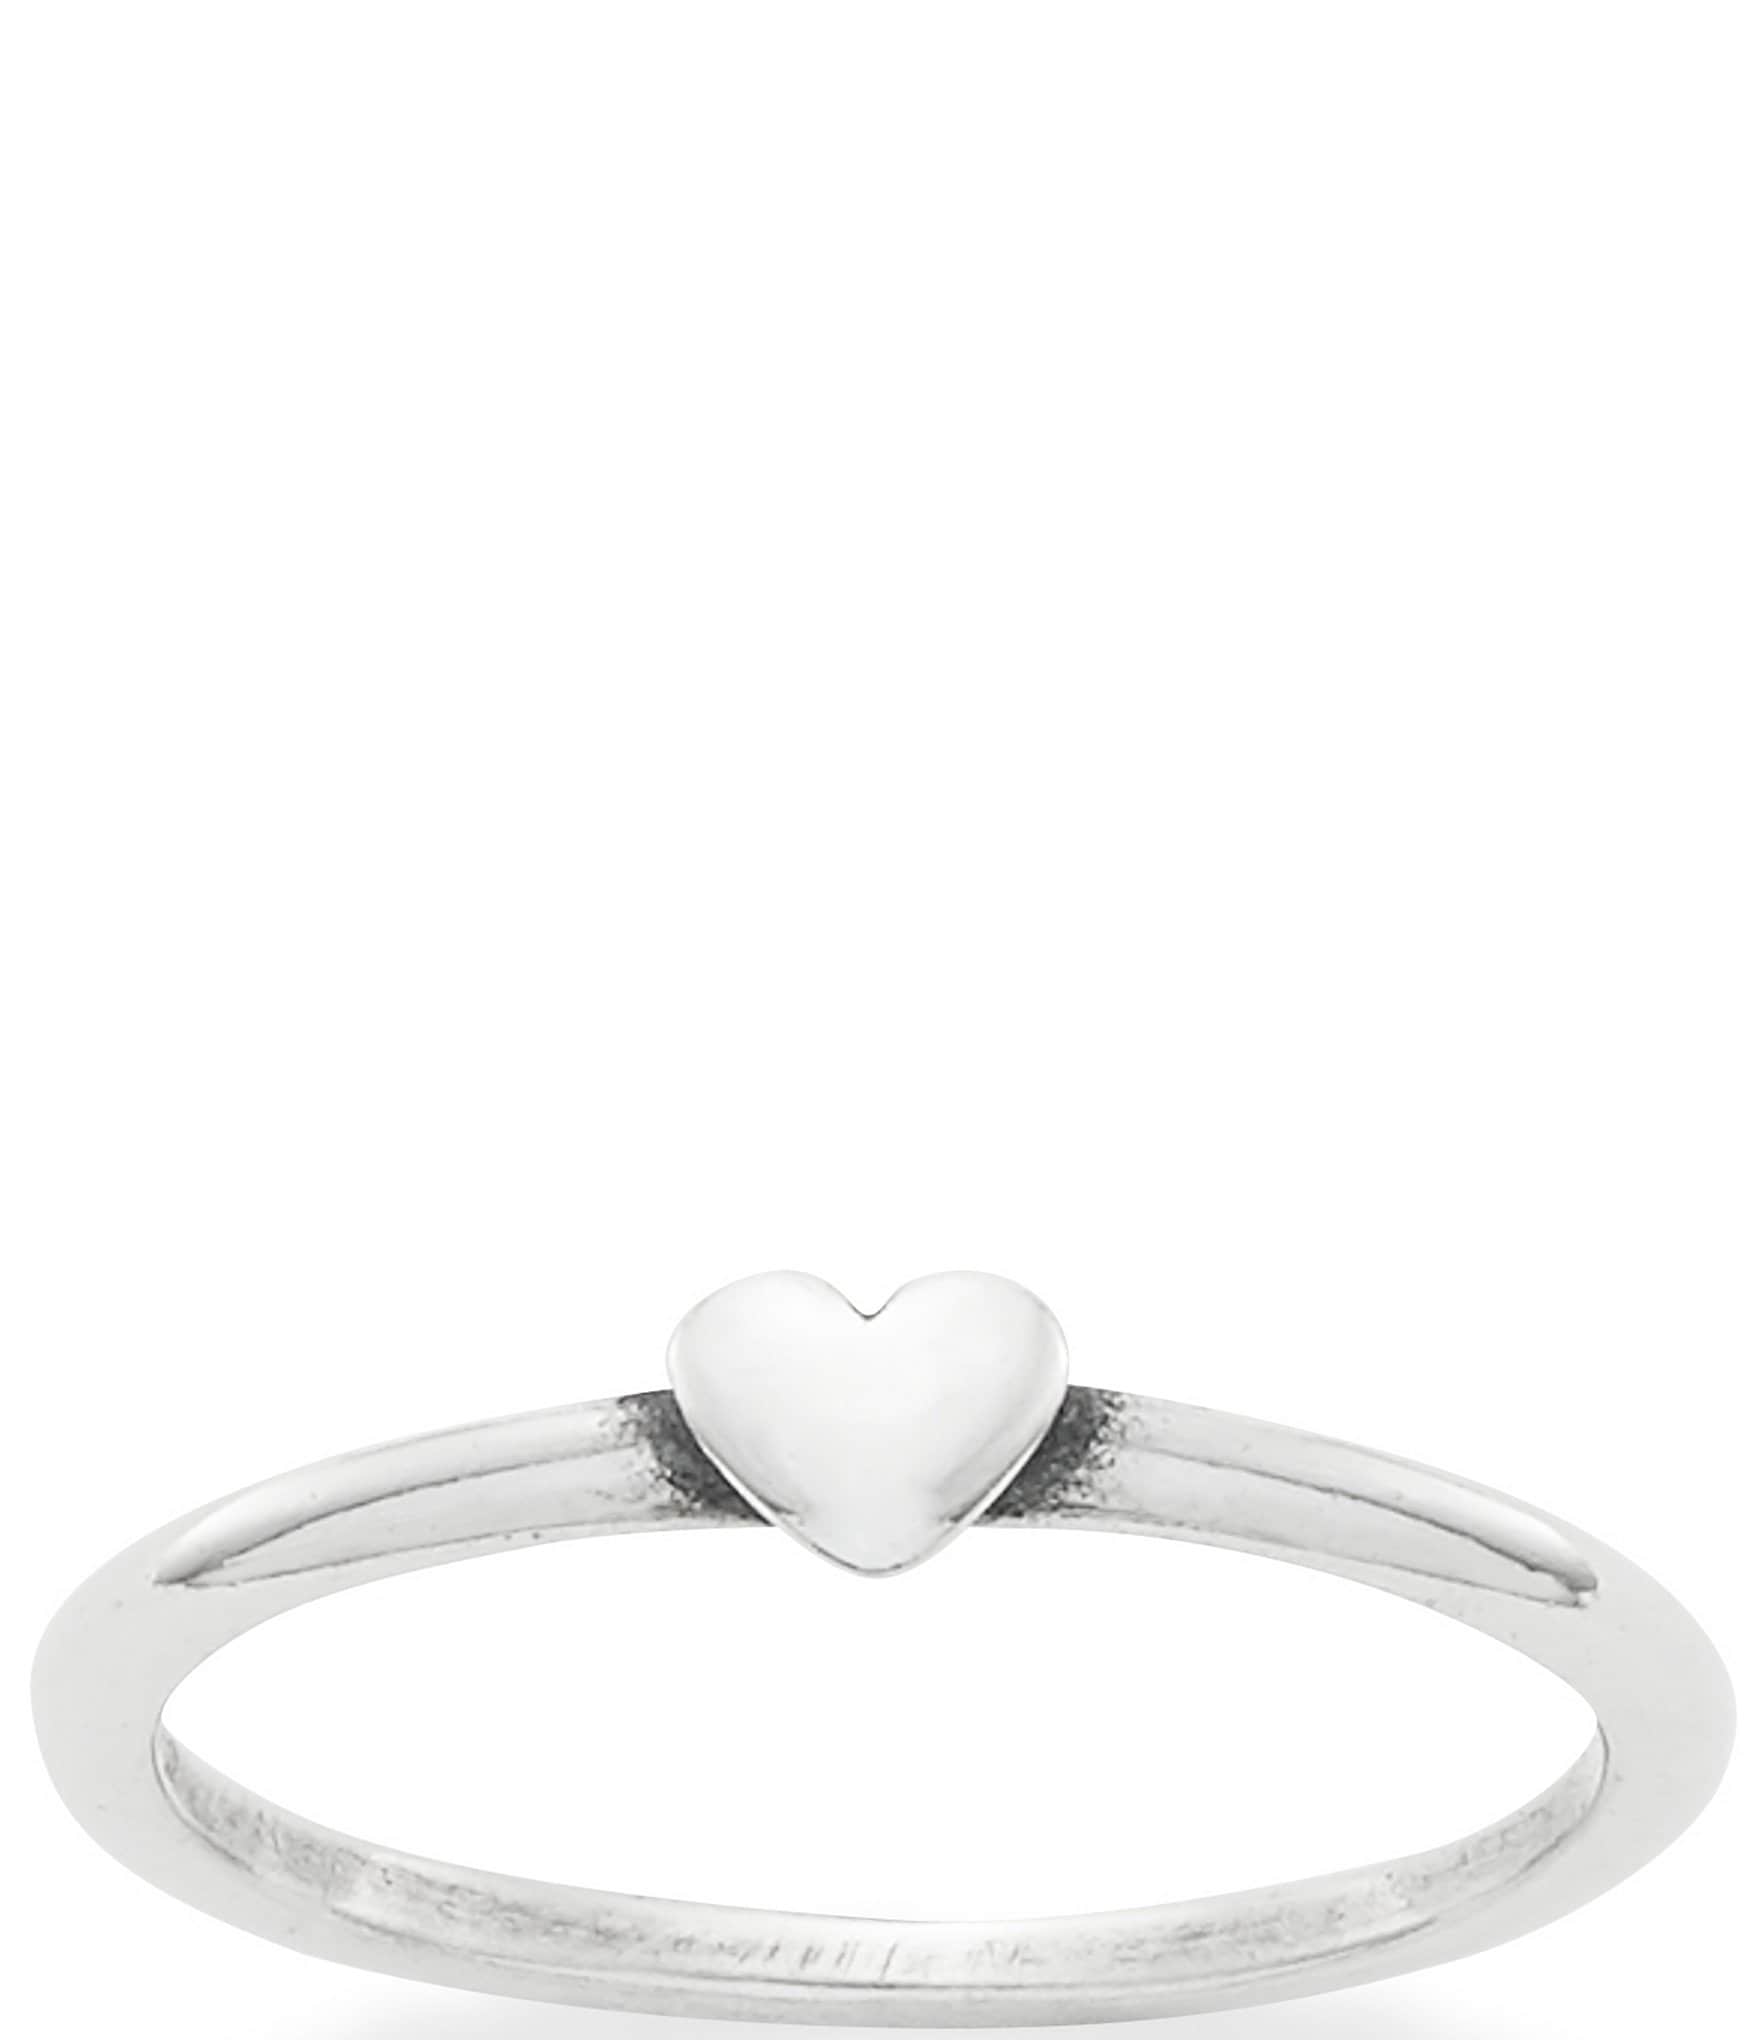 James Avery 14K Gold Delicate Pave Diamond Heart Band Ring | Pueblo Mall